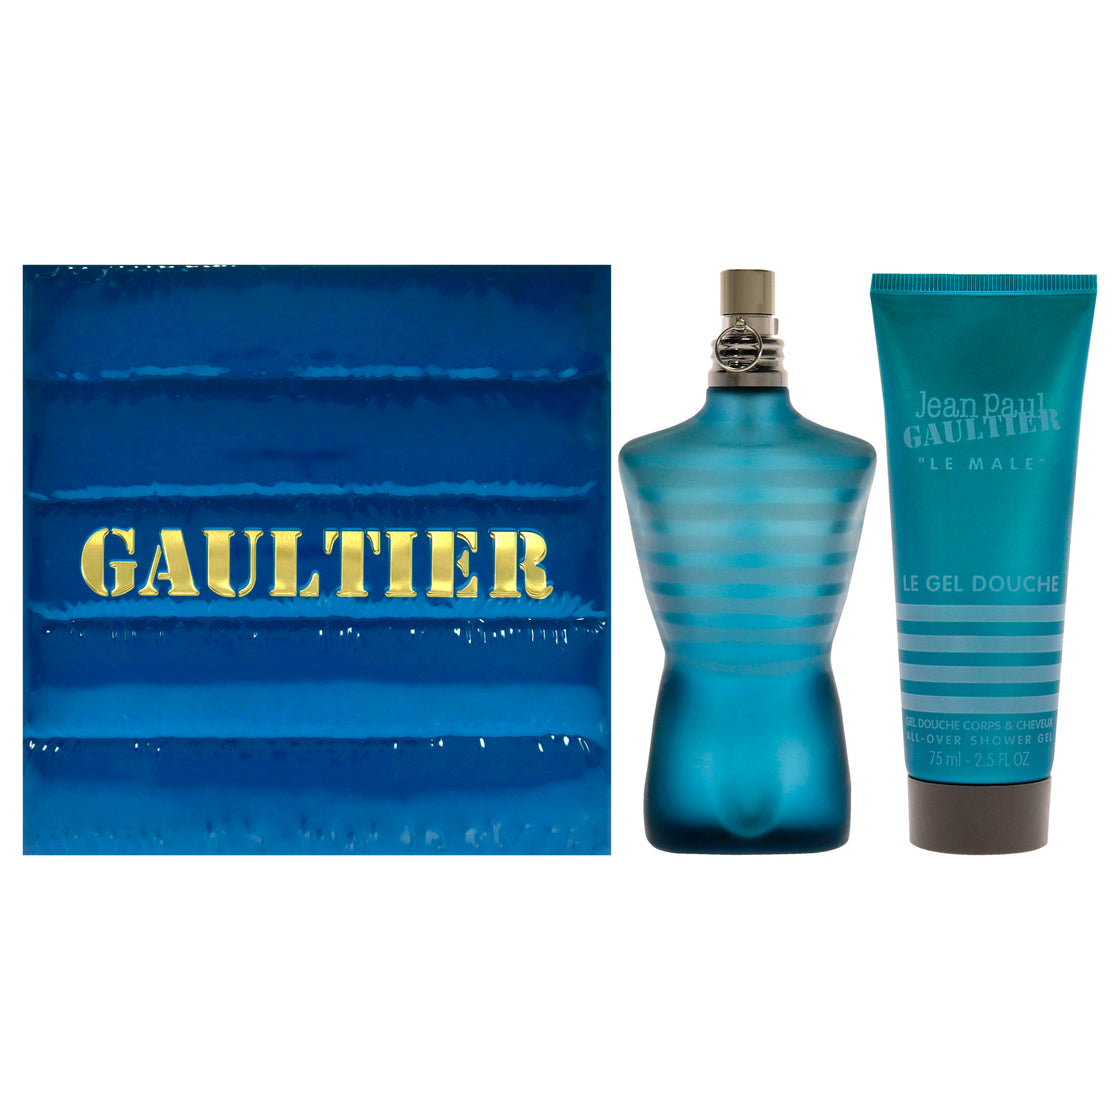 Le Male by Jean Paul Gaultier for Men - 2 Pc Gift Set 4.2oz EDT Spray, 2.5oz All-Over Shower Gel